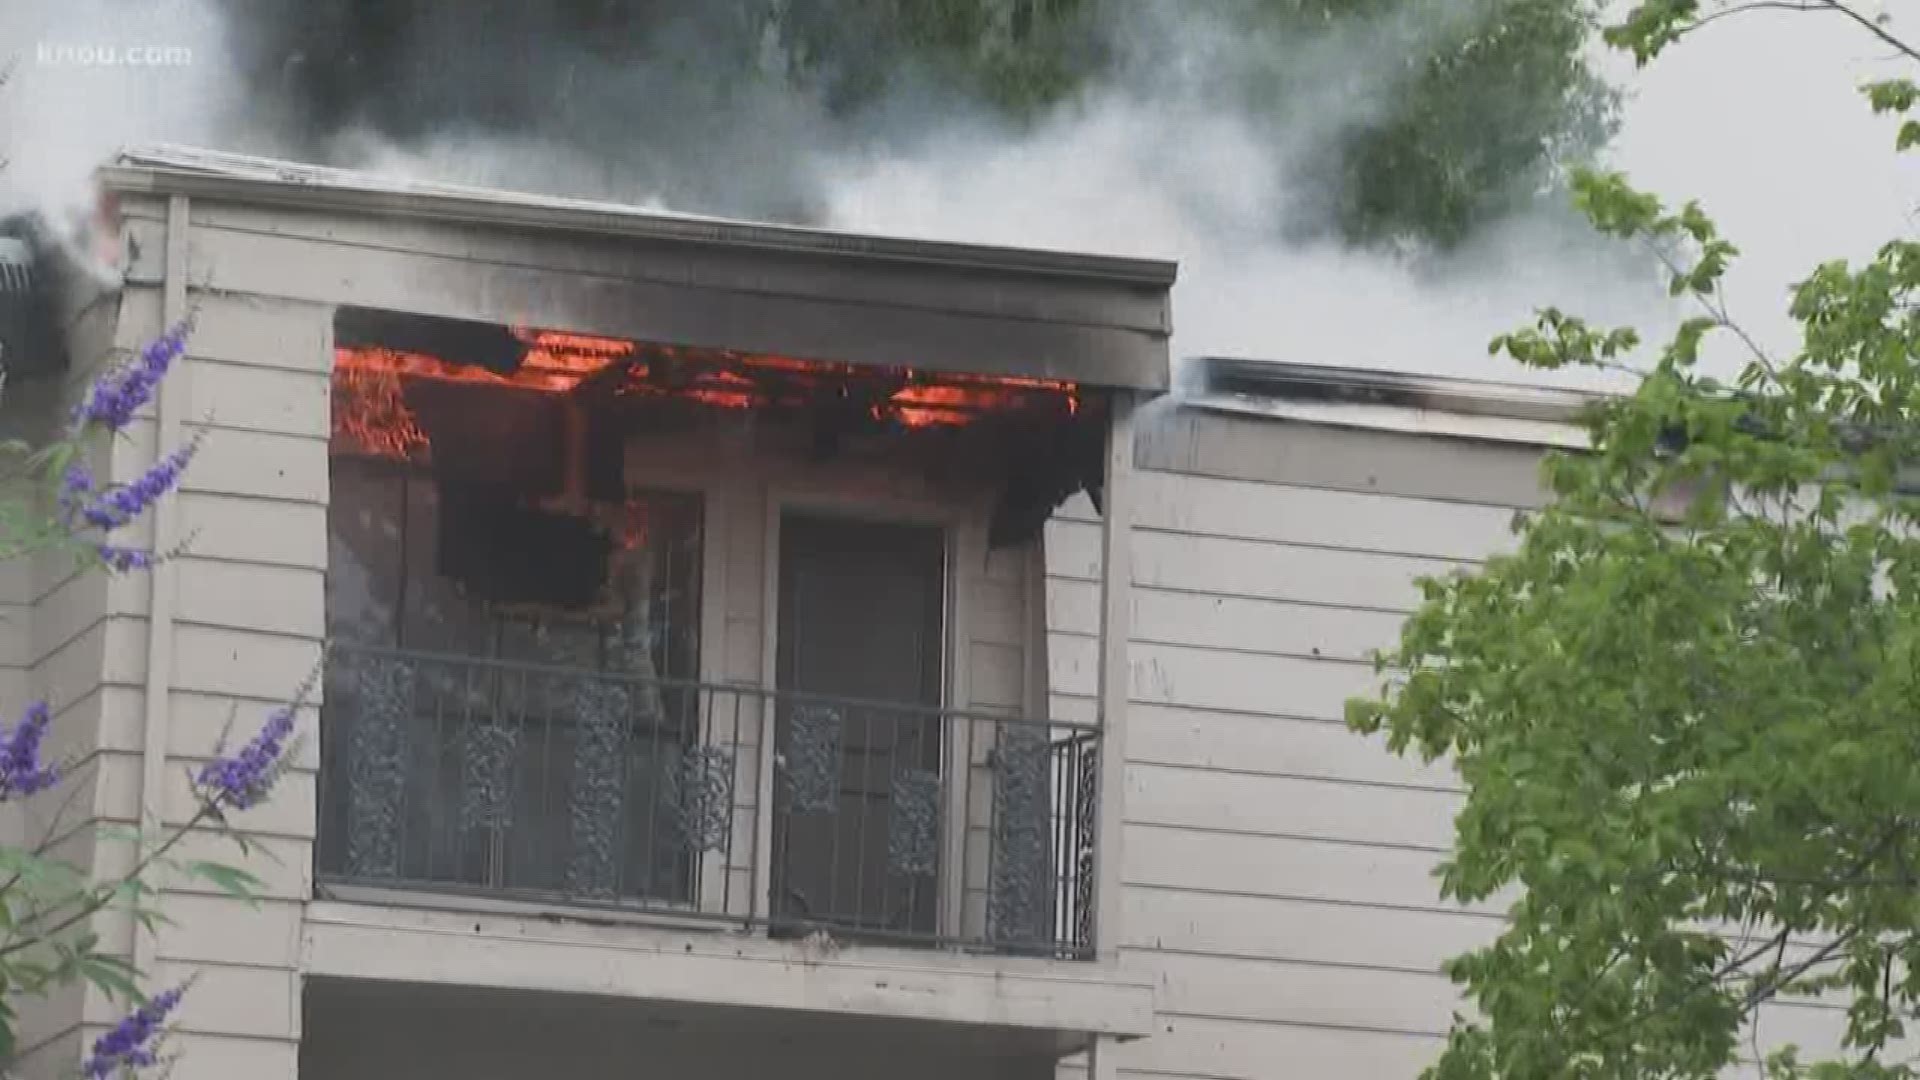 At least two people were treated for heat exhaustion Friday after a 4-alarm fire at a Galleria-area apartment complex.